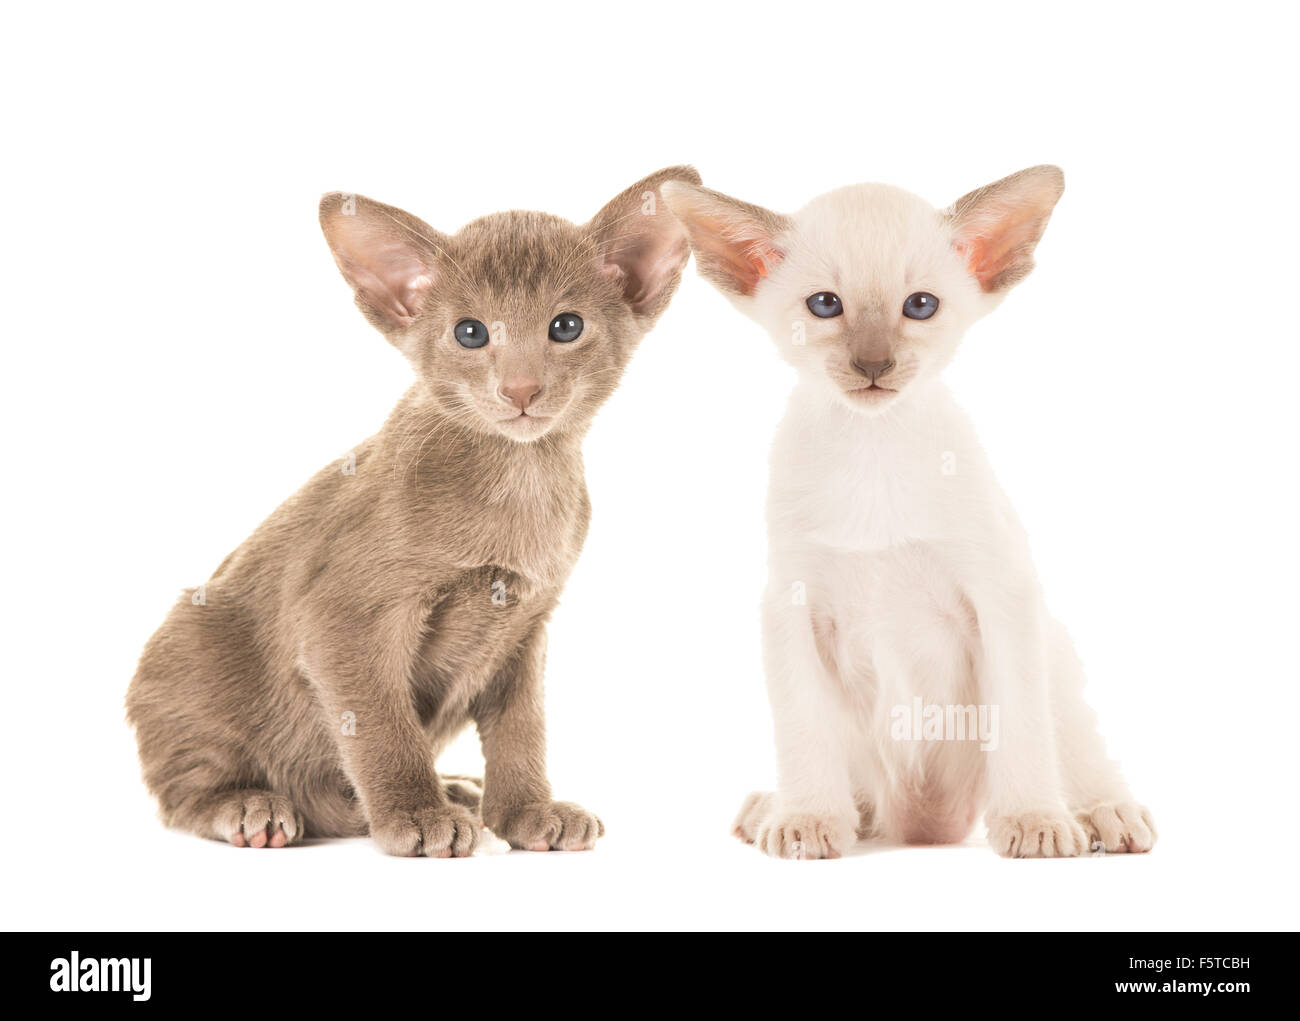 Two cute siamese baby cats on a white background Stock Photo